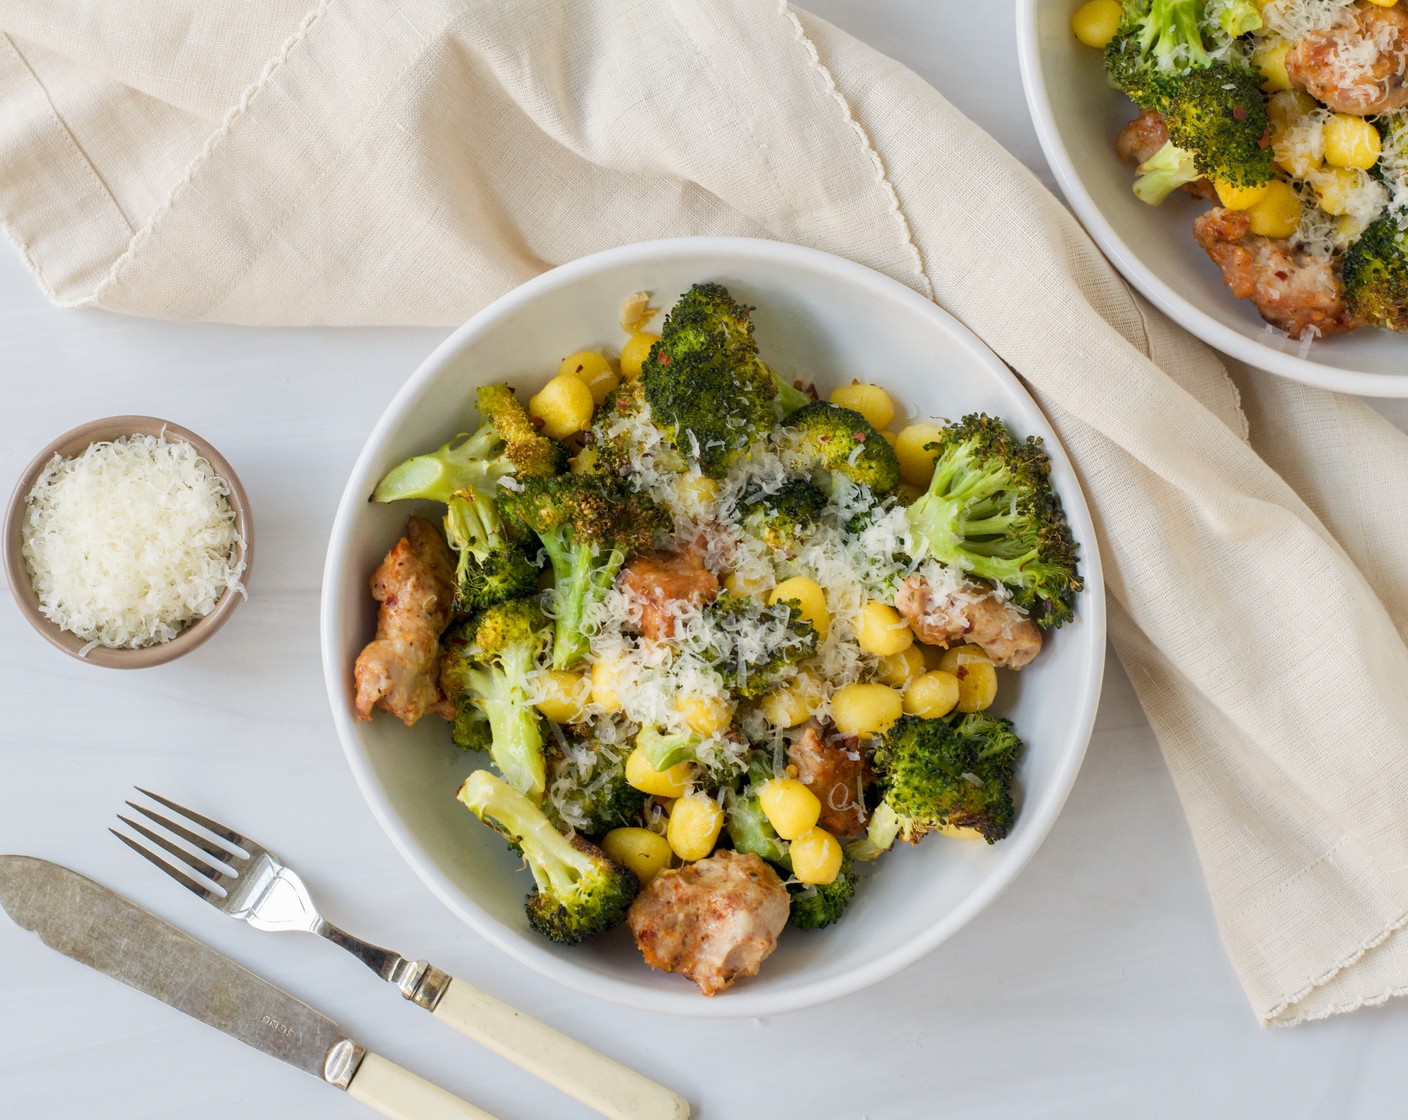 step 5 Divide the gnocchi, sausage, and broccoli among four dinner plates or pasta bowls. Garnish with Grated Parmesan Cheese (1/2 cup) and serve immediately.